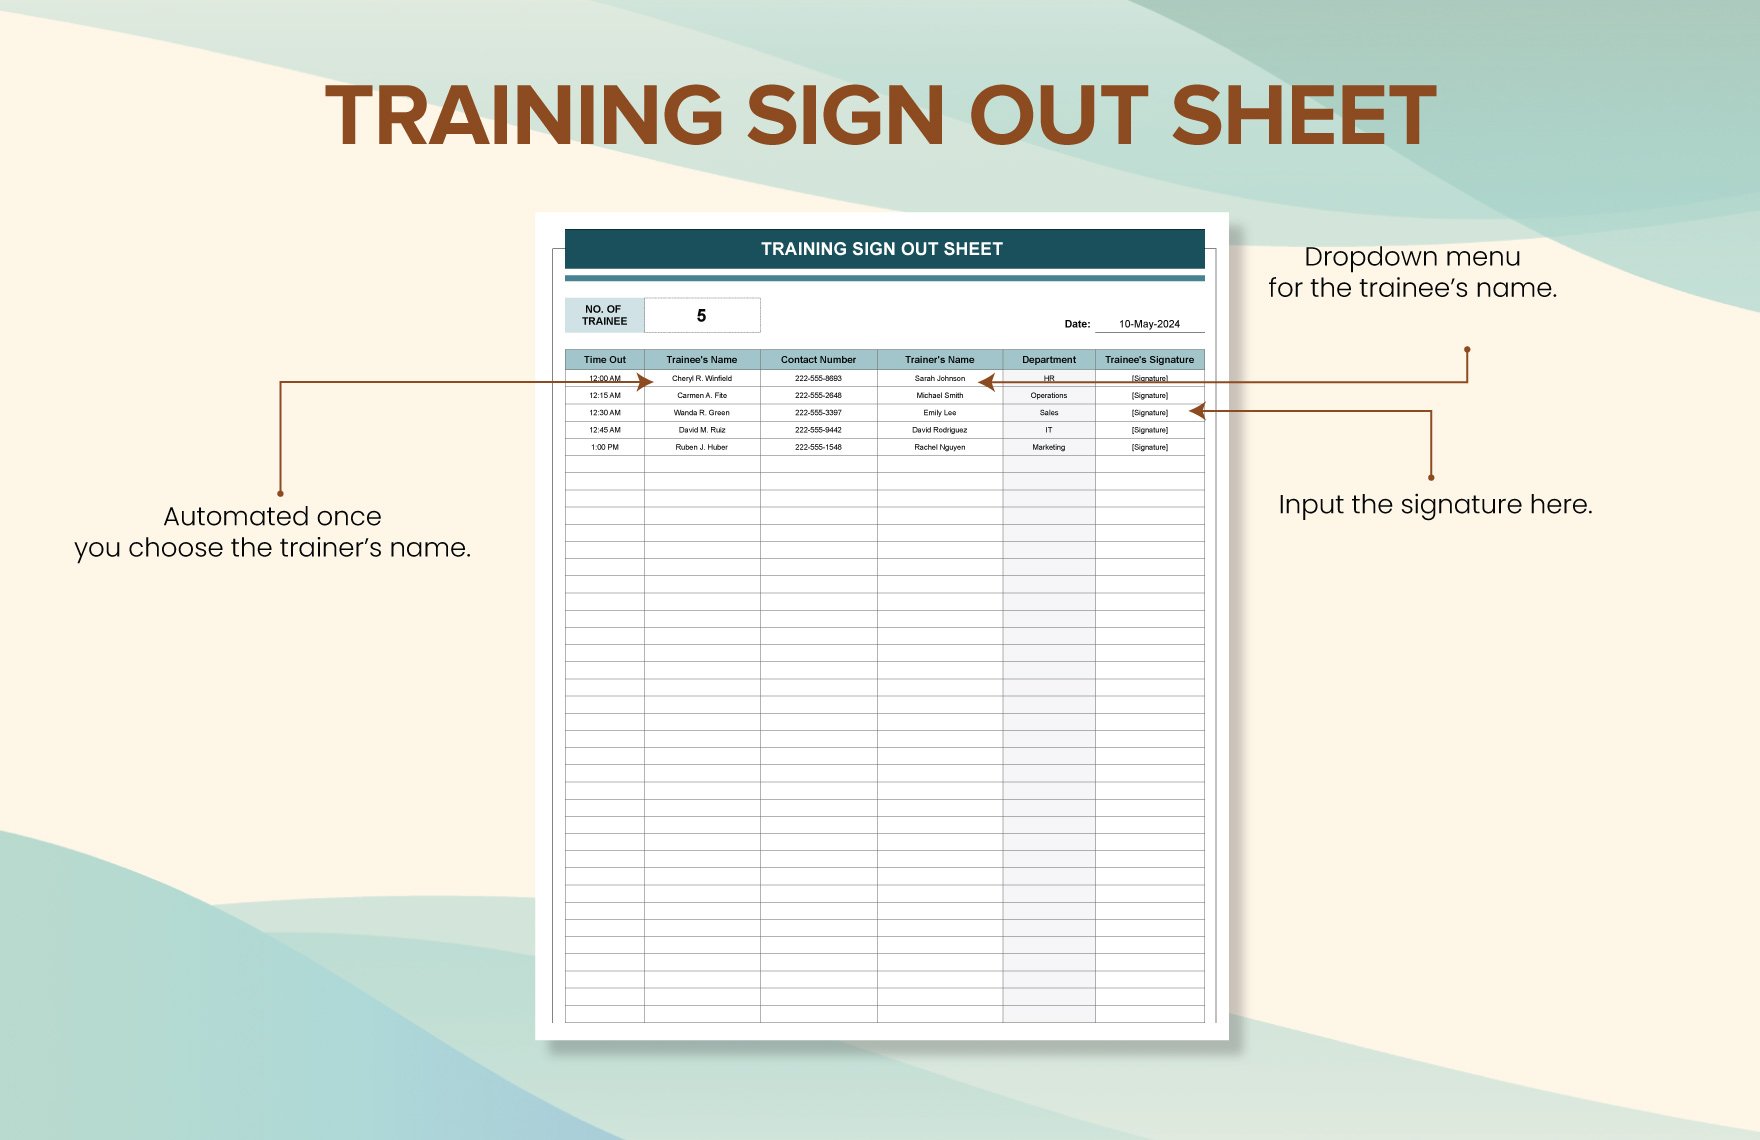 Training Sign Out Sheet Template